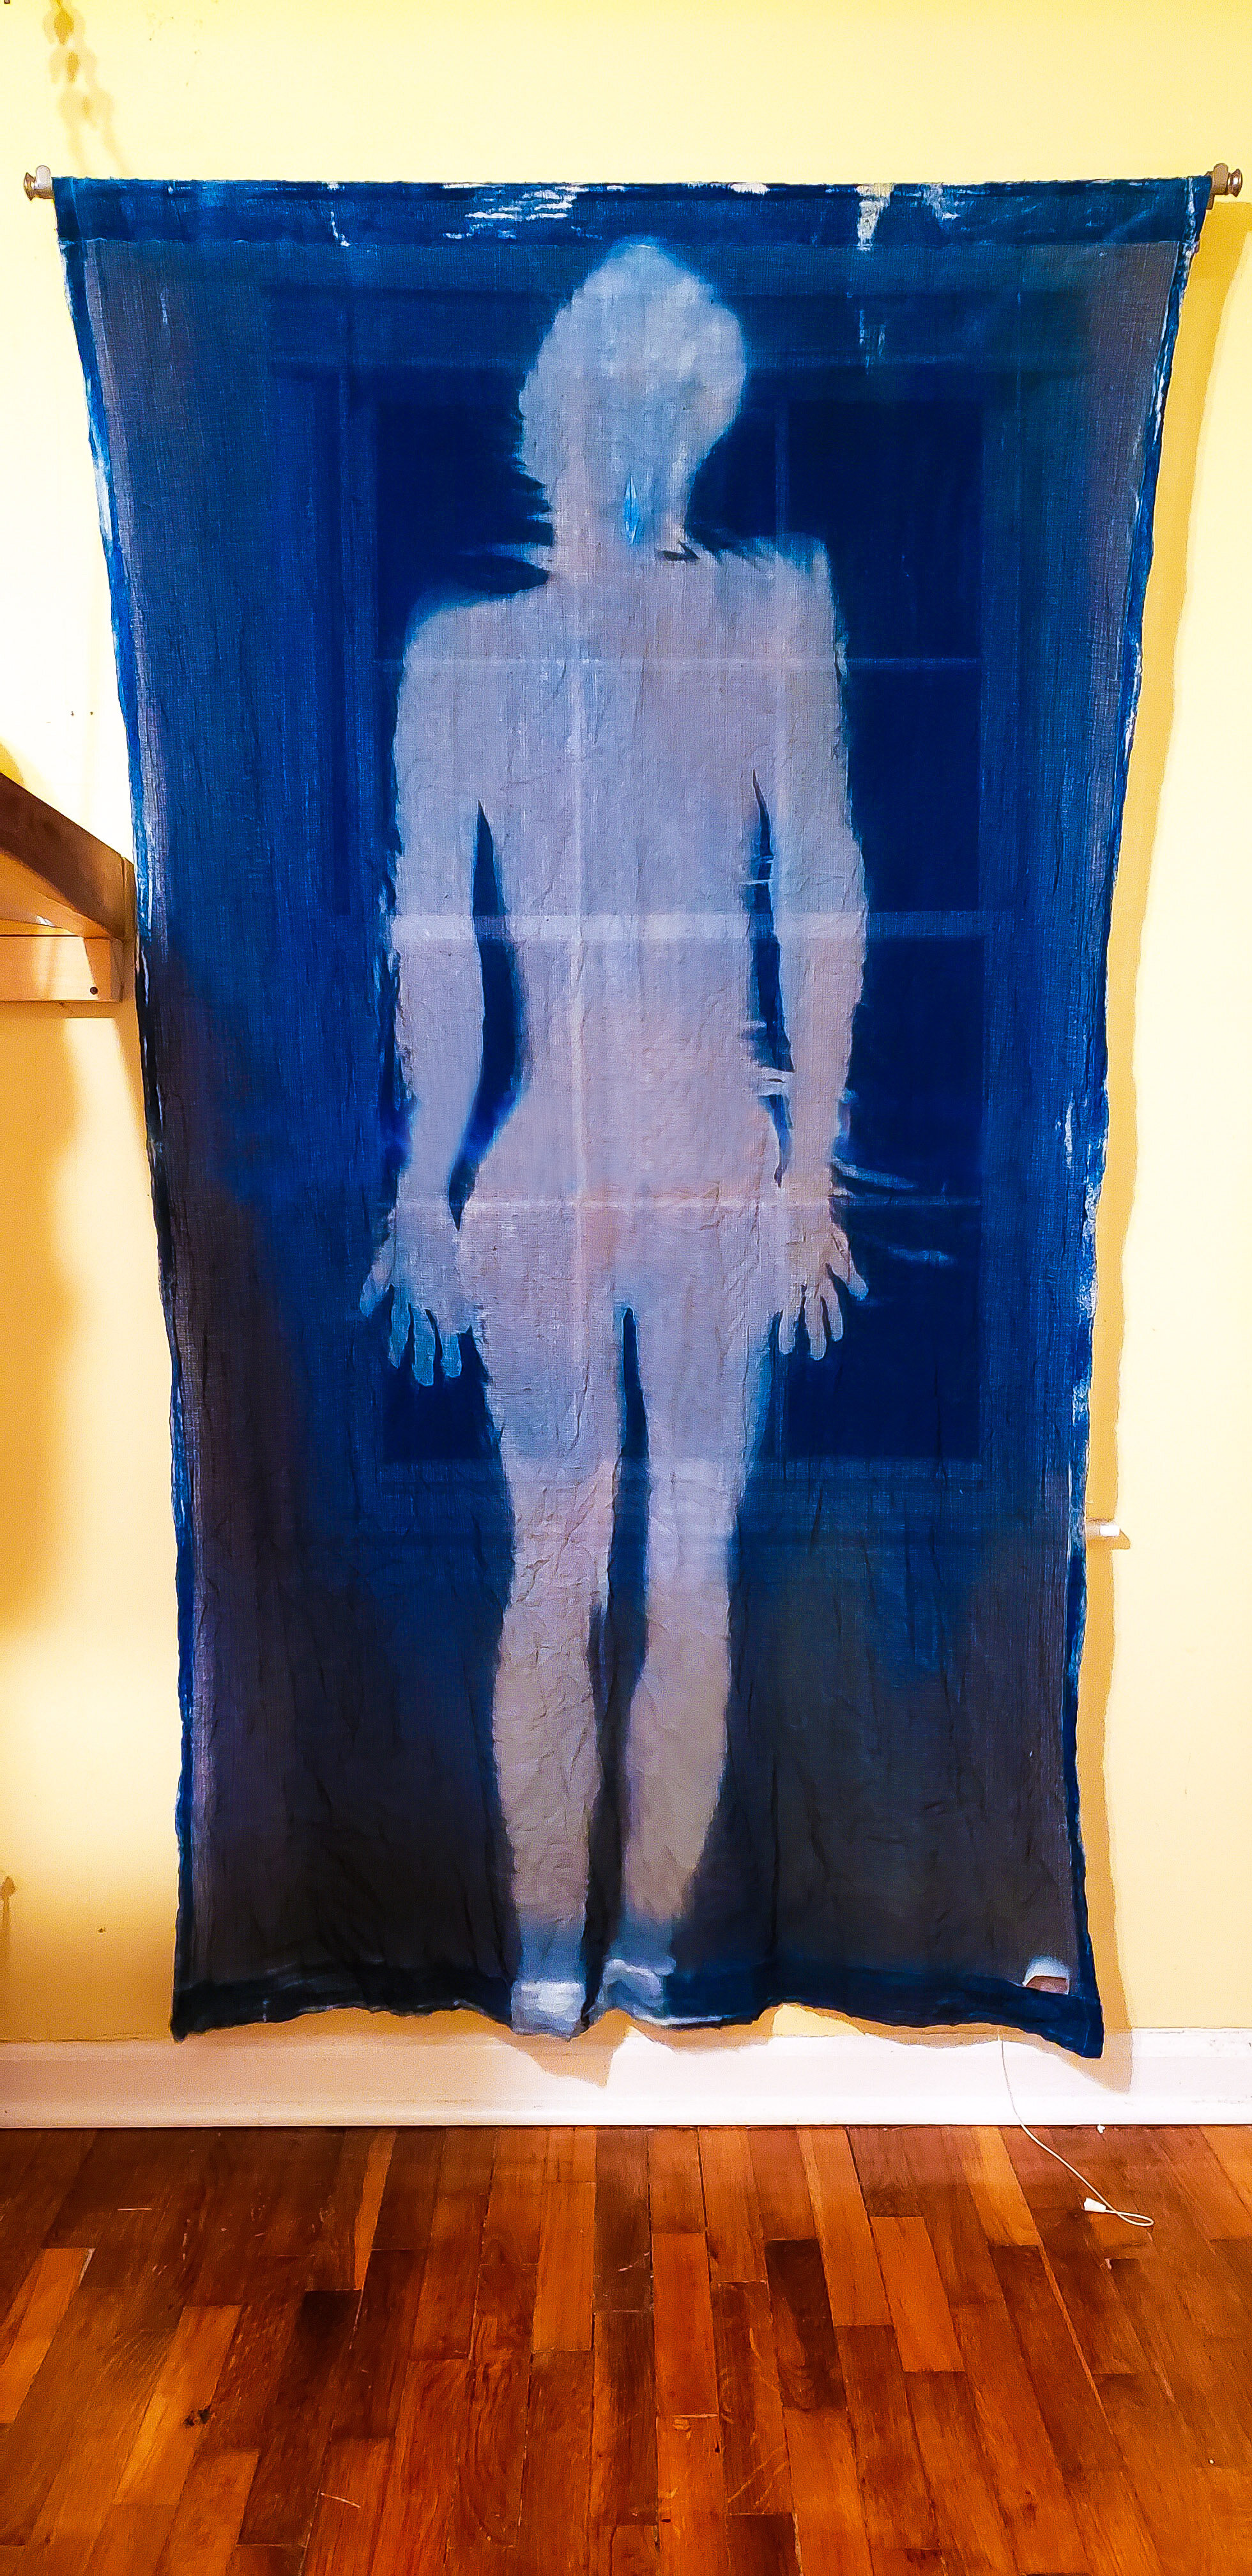 Stasis [night], 2020, cotton curtain, cyanotype solution, curtain rod, and hardware, 55 x 84 inches